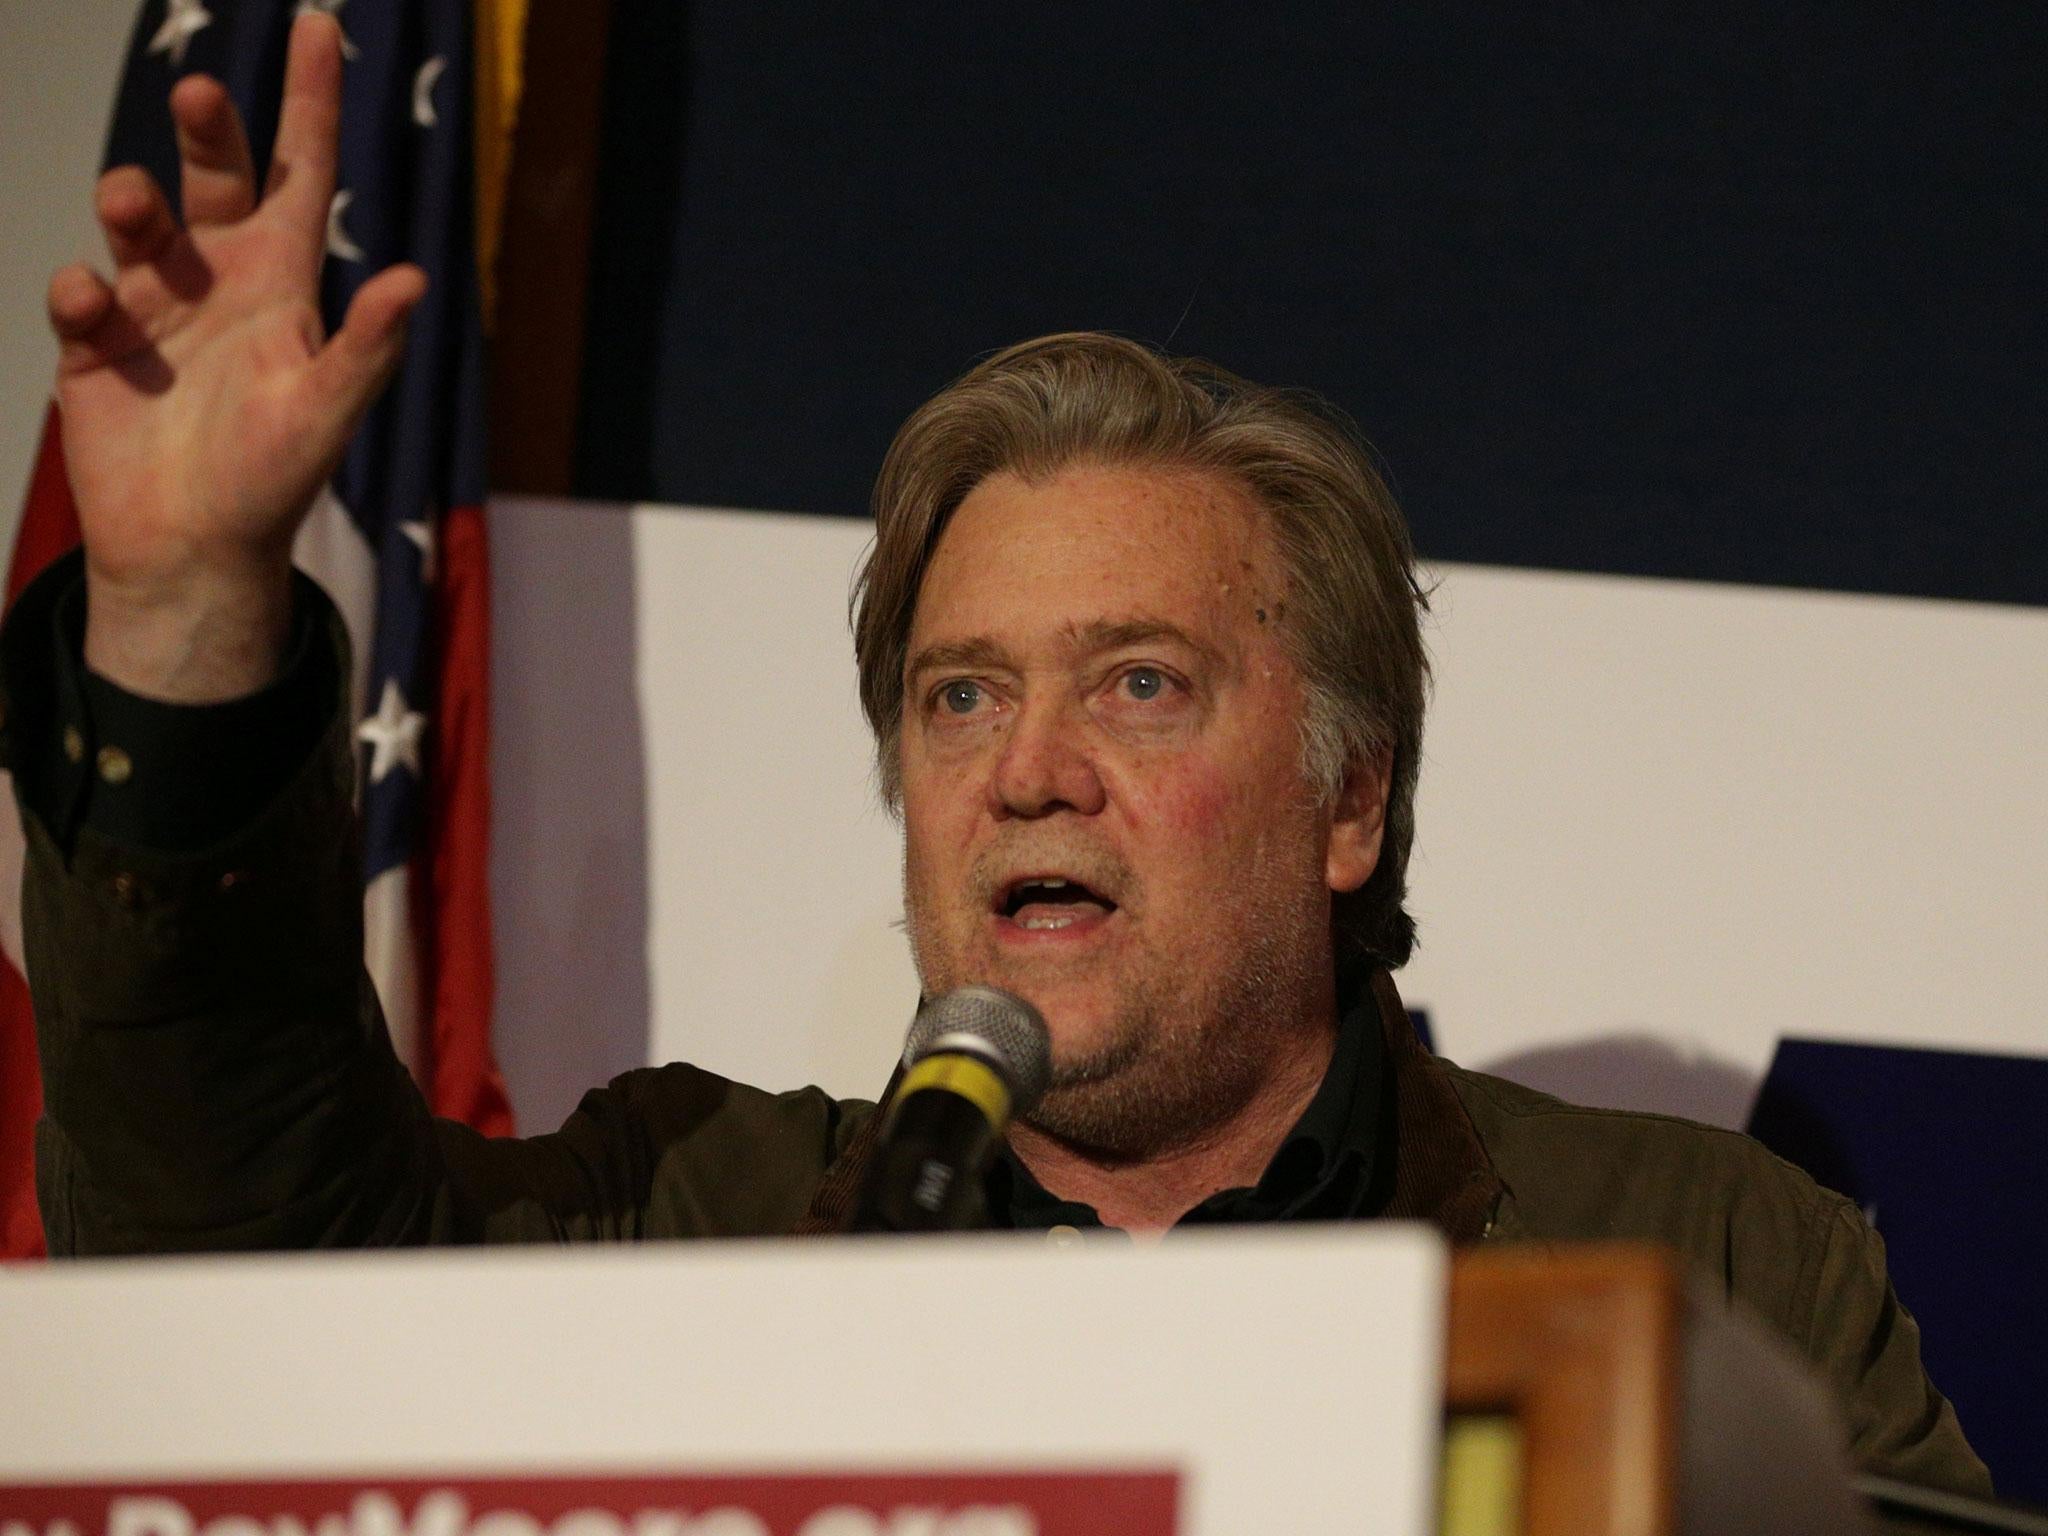 Steve Bannon speaks after Republican candidate Roy Moore defeated incumbent Luther Strange